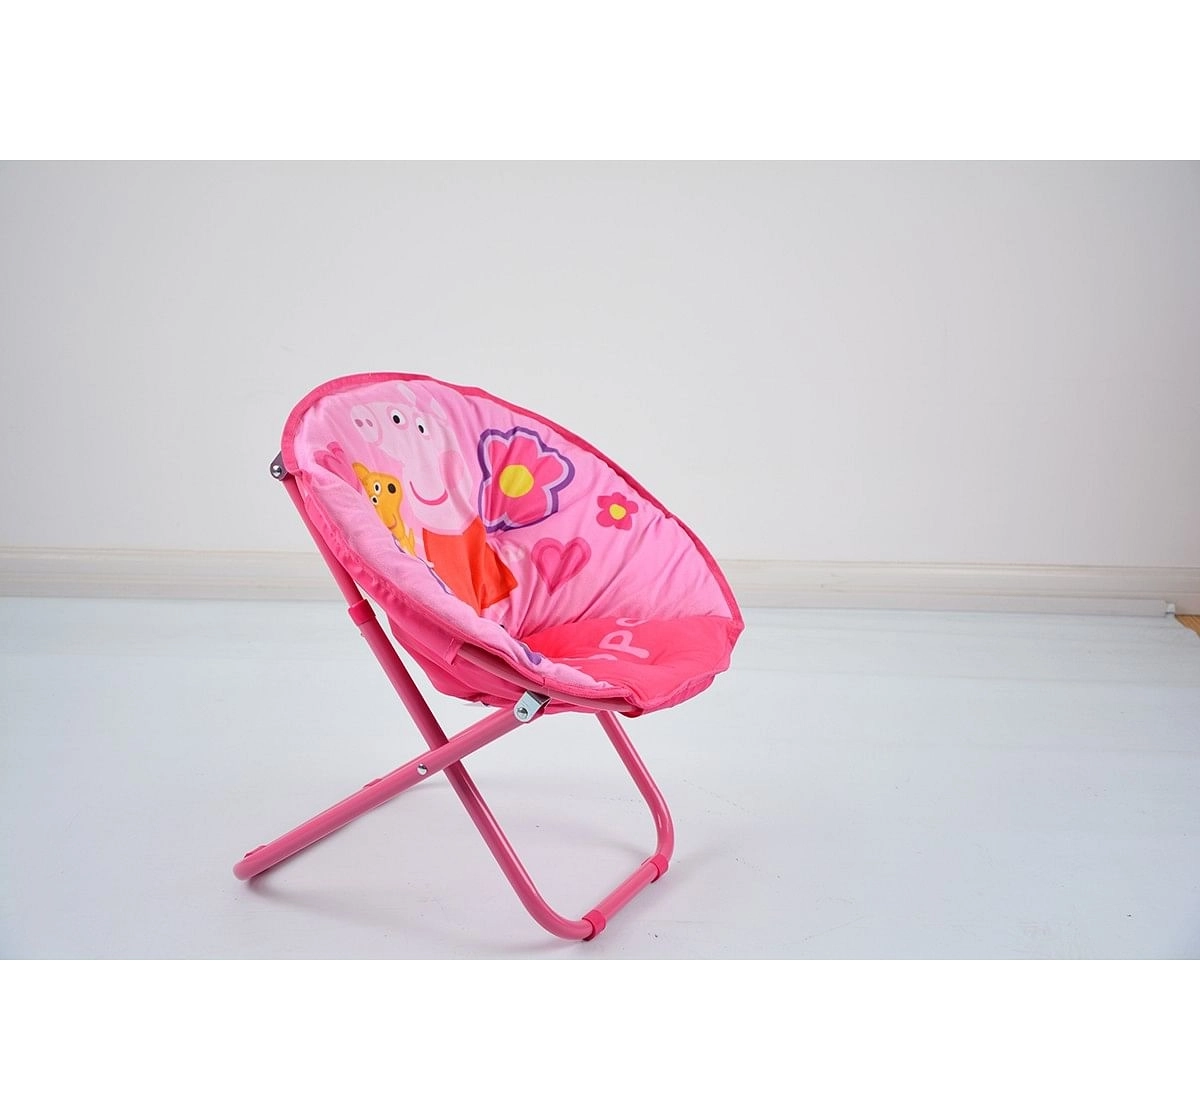 Flourish  Peppa Pig Moon Chair Outdoor Leisure for Kids age 3Y+ 